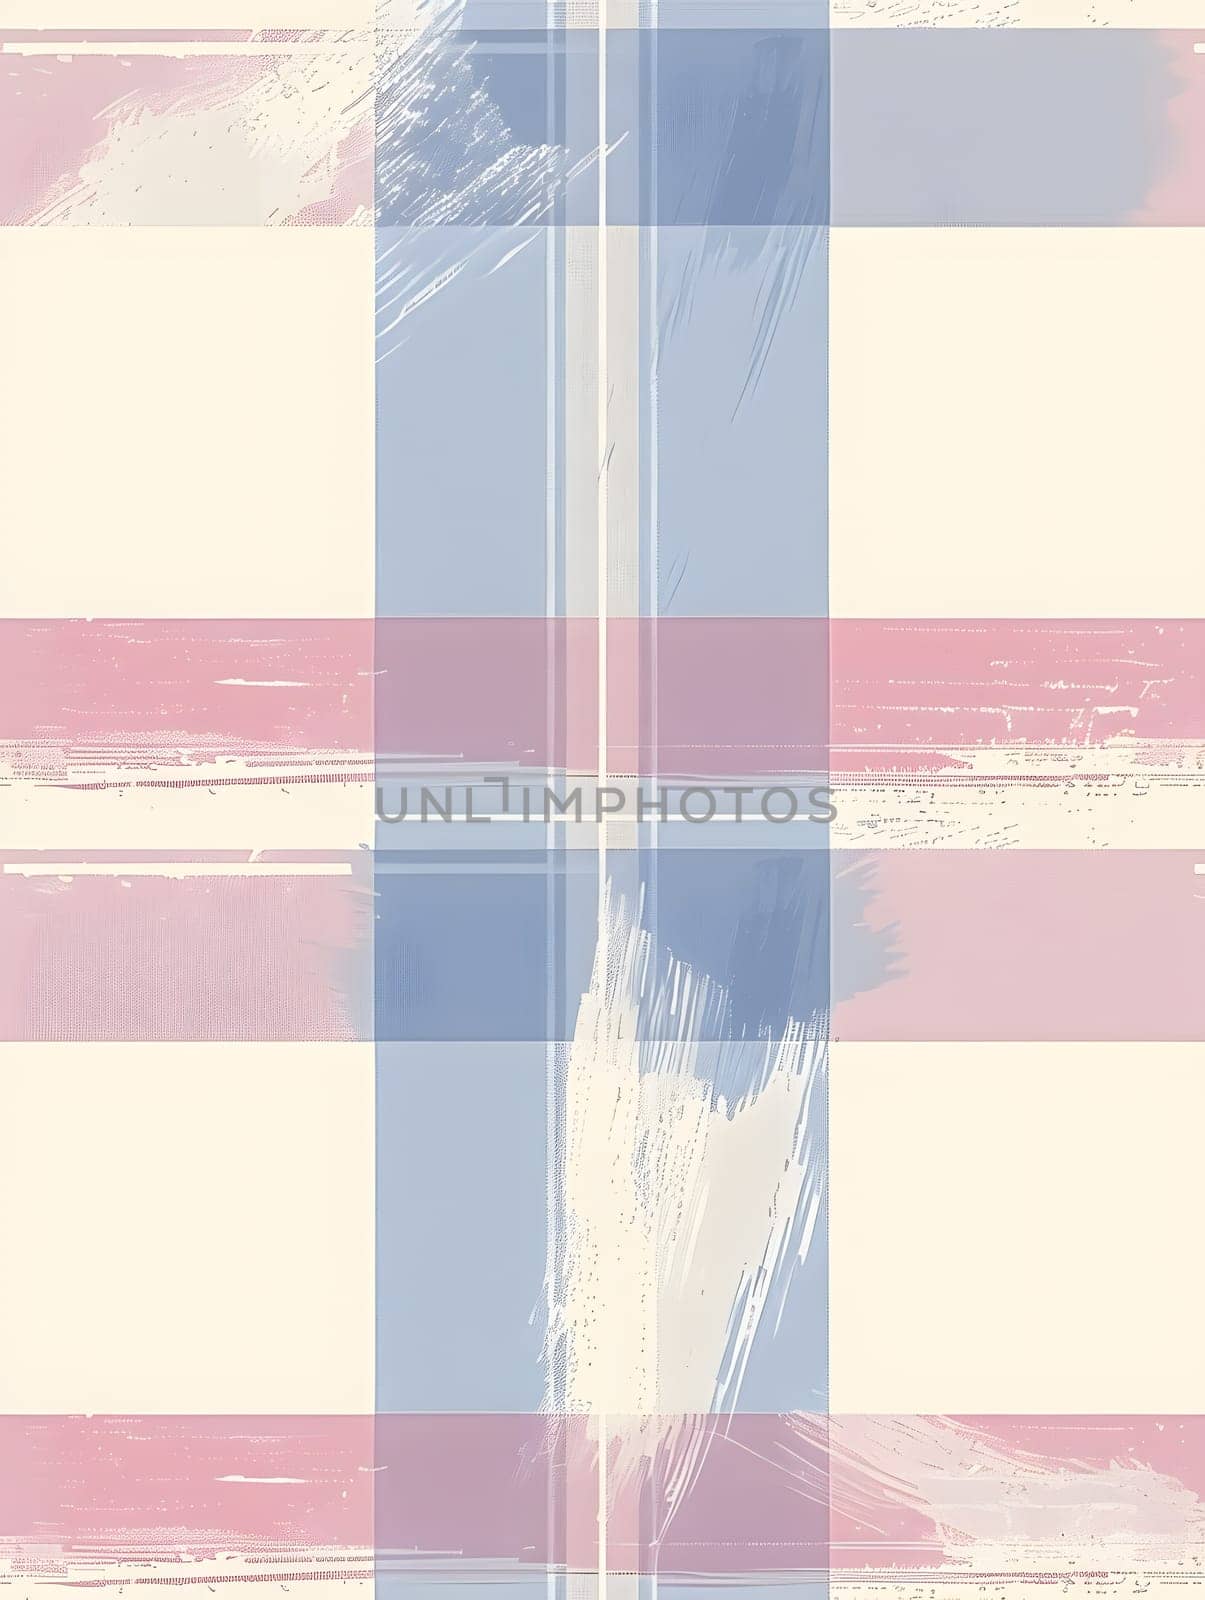 A plaid pattern in red, white, and blue on a white background, with rectangles of purple, orange, violet, magenta, and electric blue tints and shades